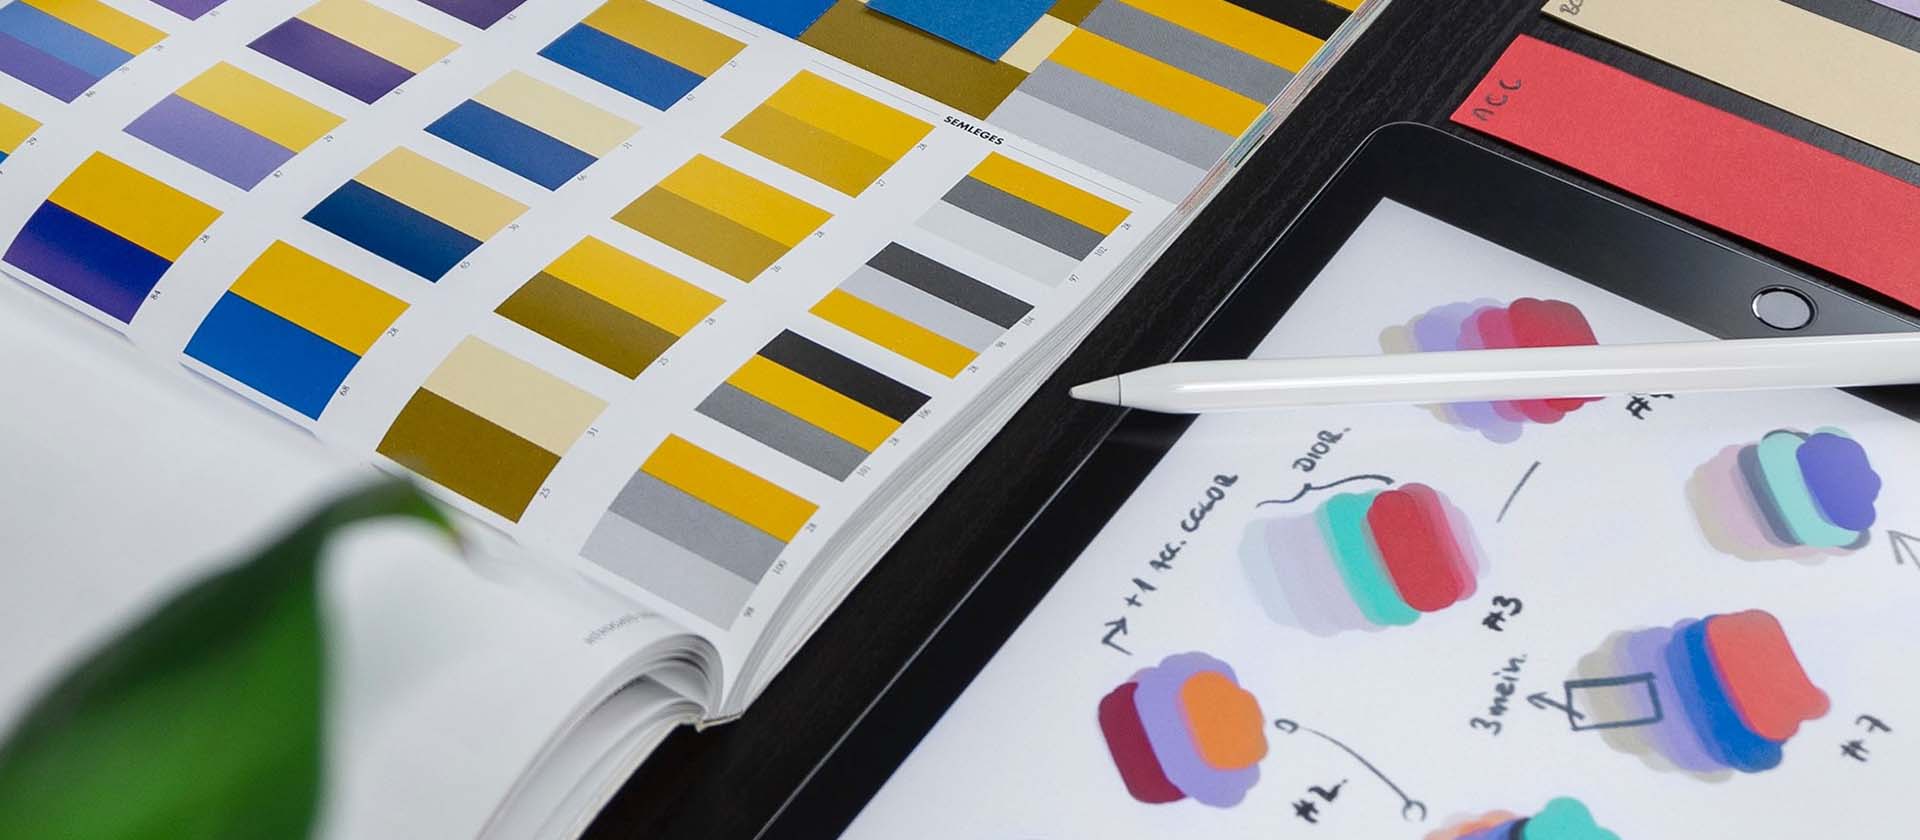 An ipad showing colour testing and a book of colour patterns abobe it, testing for website redesign